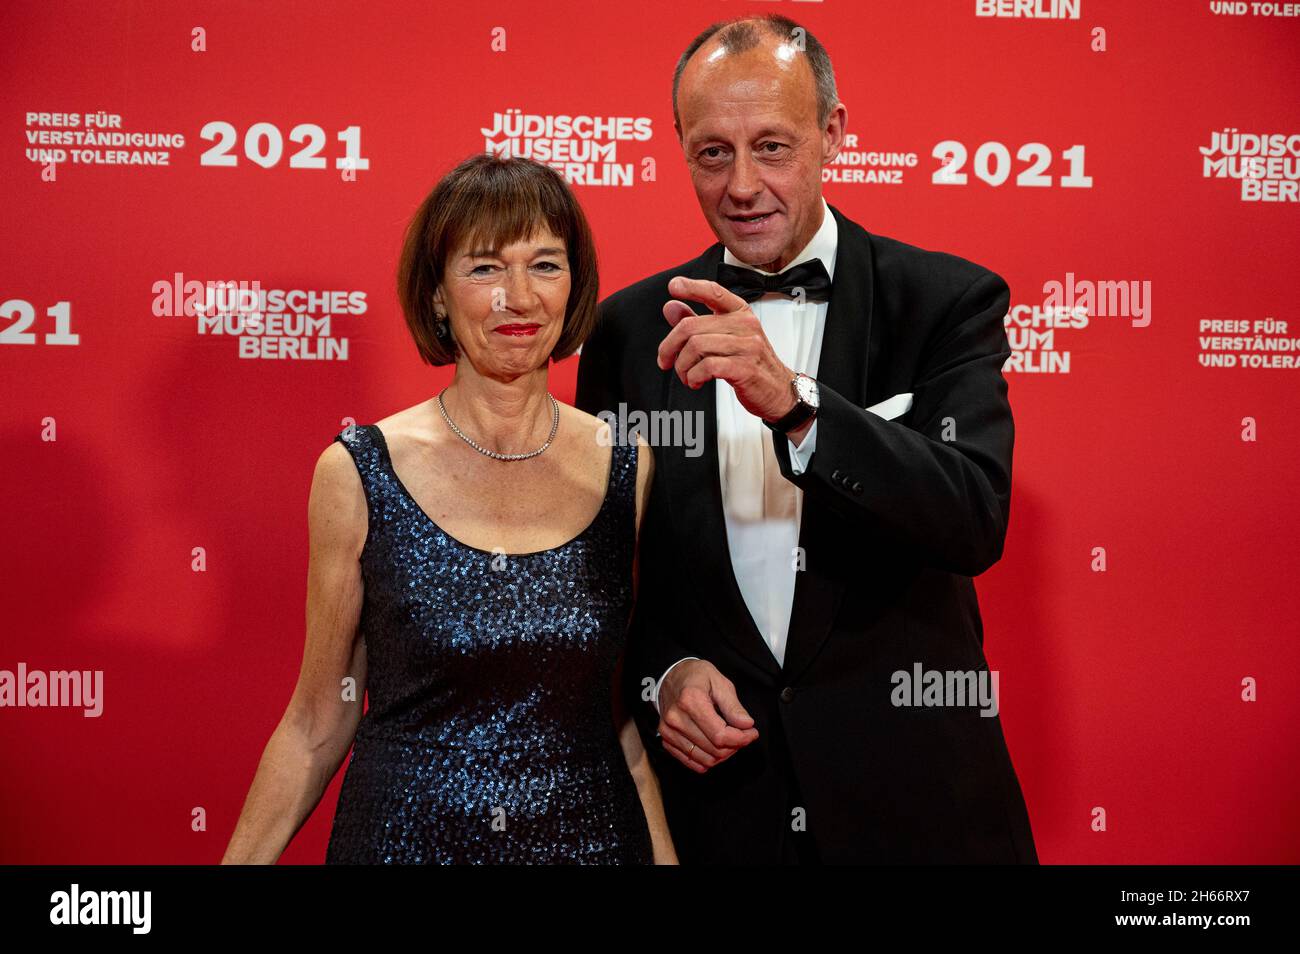 Berlin, Germany. 13th Nov, 2021. Friedrich Merz (CDU) and his wife Charlotte Merz stand at the press wall at the award ceremony for the 'Prize for Understanding and Tolerance'. The prize goes to the President of the Jewish Community of Munich and Upper Bavaria Knobloch and the architect Libeskind. Stephan Habrath, President of the Federal Constitutional Court, Daniella Luxembourg, art dealer, Credit: Fabian Sommer/dpa/Alamy Live News Stock Photo